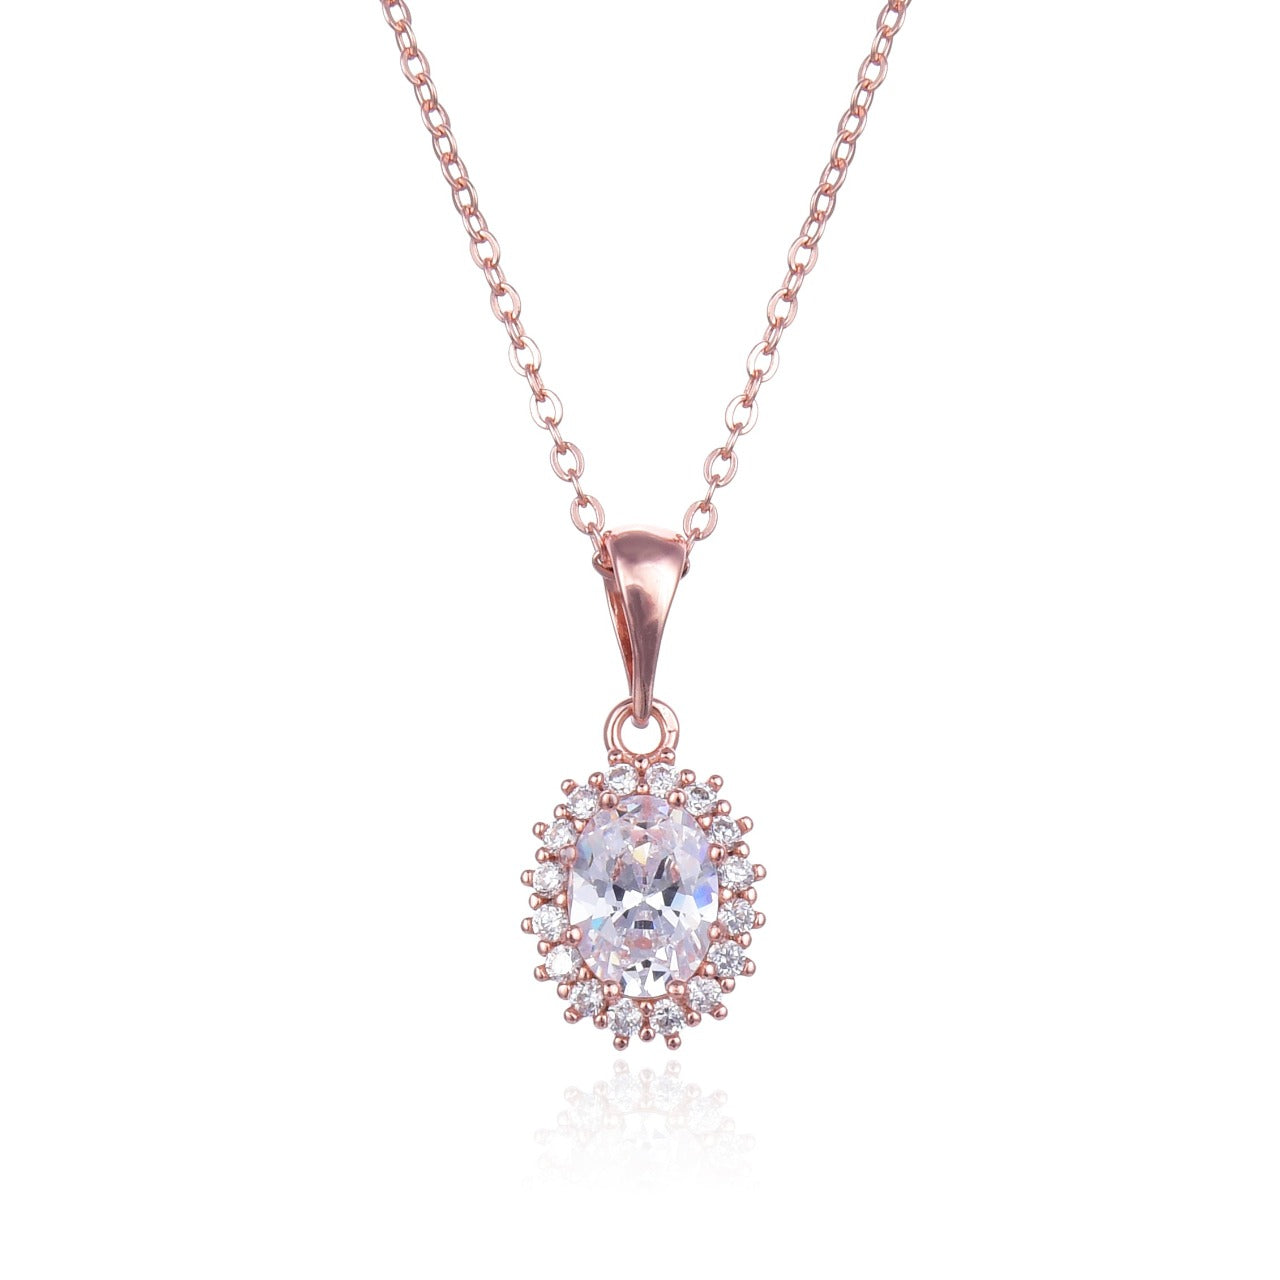 Rose Gold Oval Necklace by Kilkenny Silver   Rose gold plated sterling silver oval shaped necklace with cubic zirconia stones.